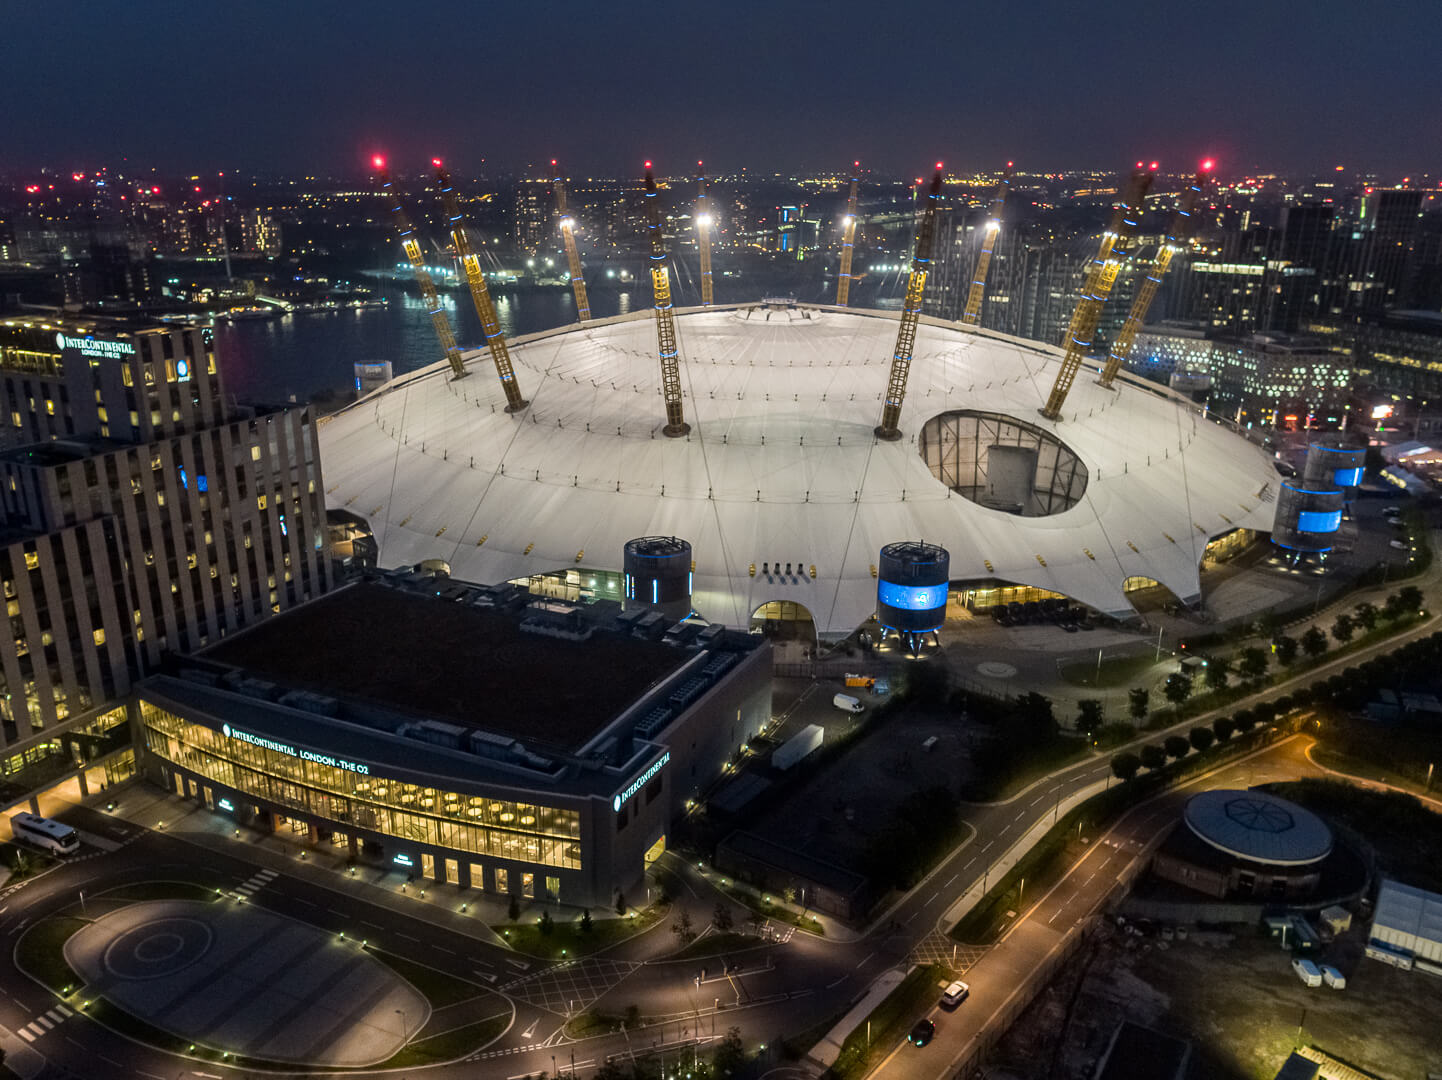 Commercial architecture, interior & aerial photography - Aerial drone photography at night, O2 Arena, London